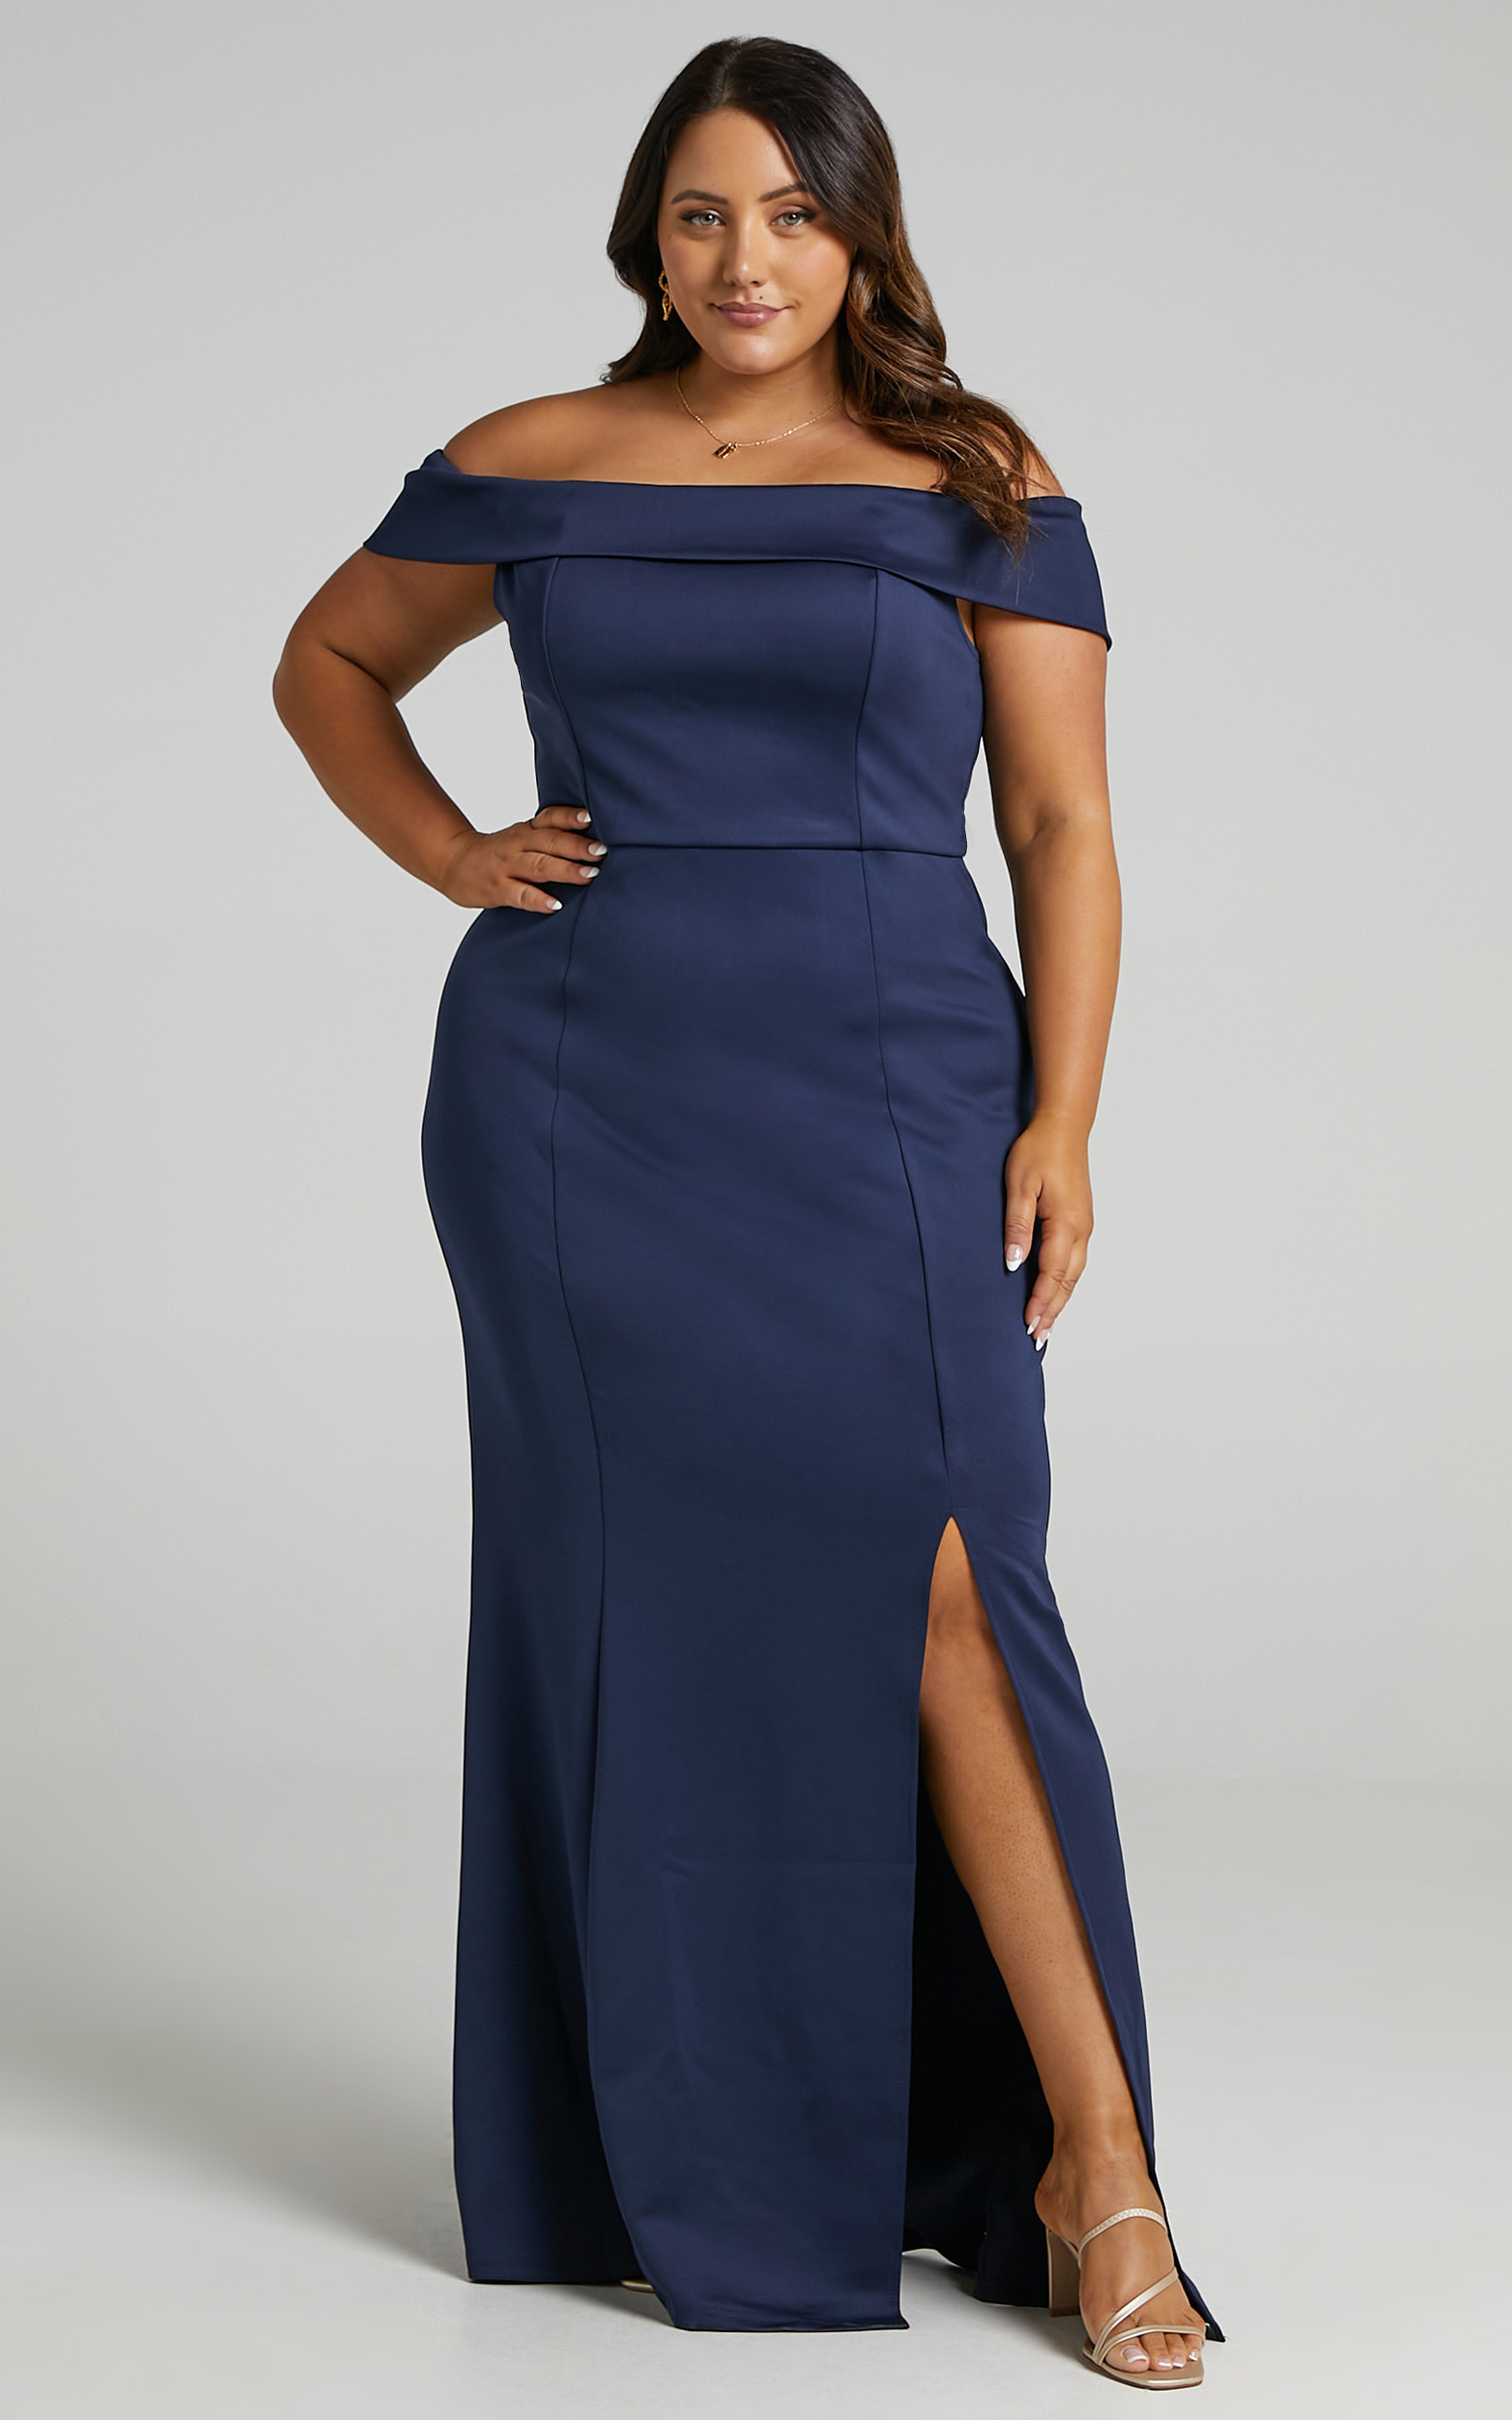 We Got This Feeling Dress in Navy - 20, NVY3, hi-res image number null